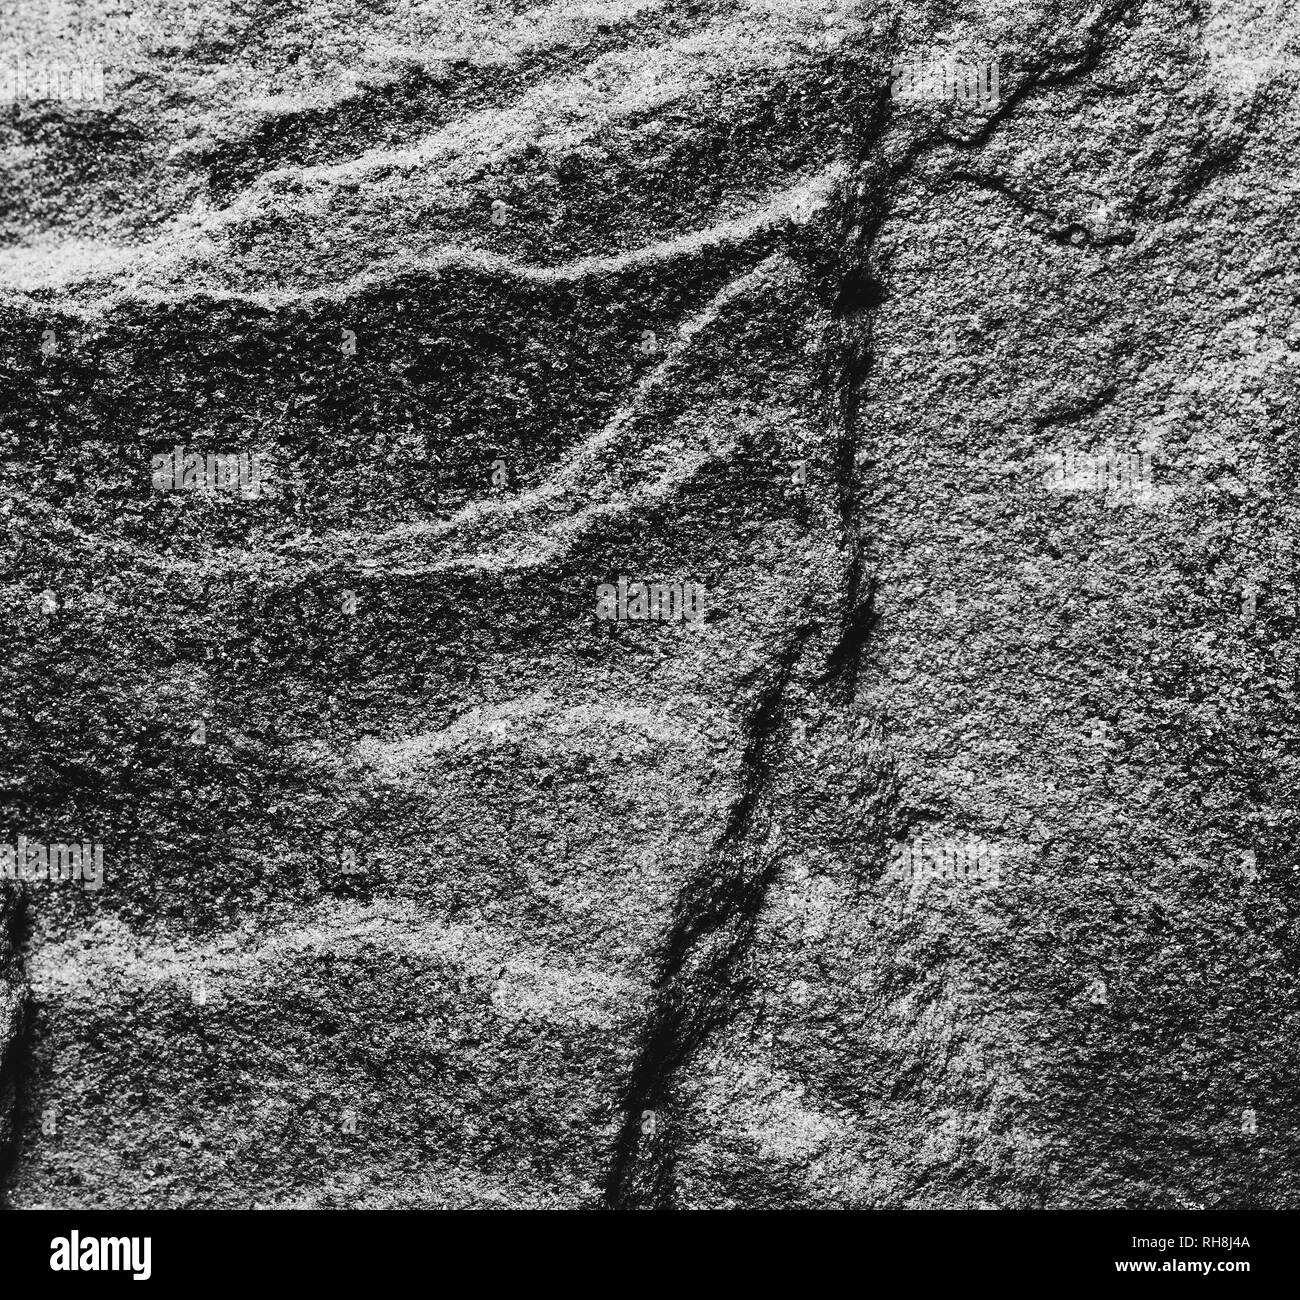 the texture of the stone flagstones Sandstone, black and white photo Stock Photo